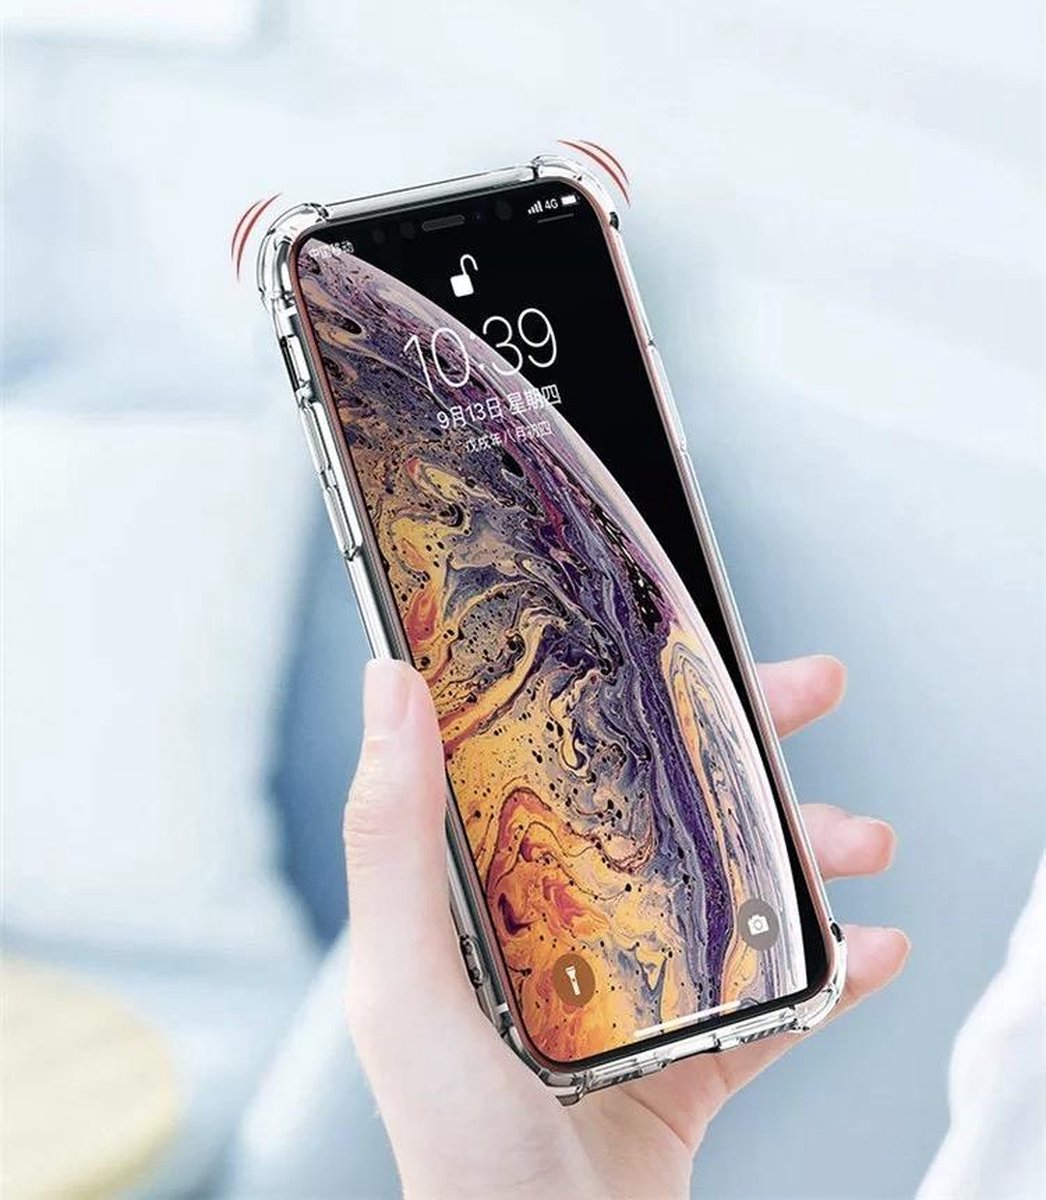 iPhone X - IPhone Xs Hoesje Shock Proof Siliconen Case Extra Stevig Transparant